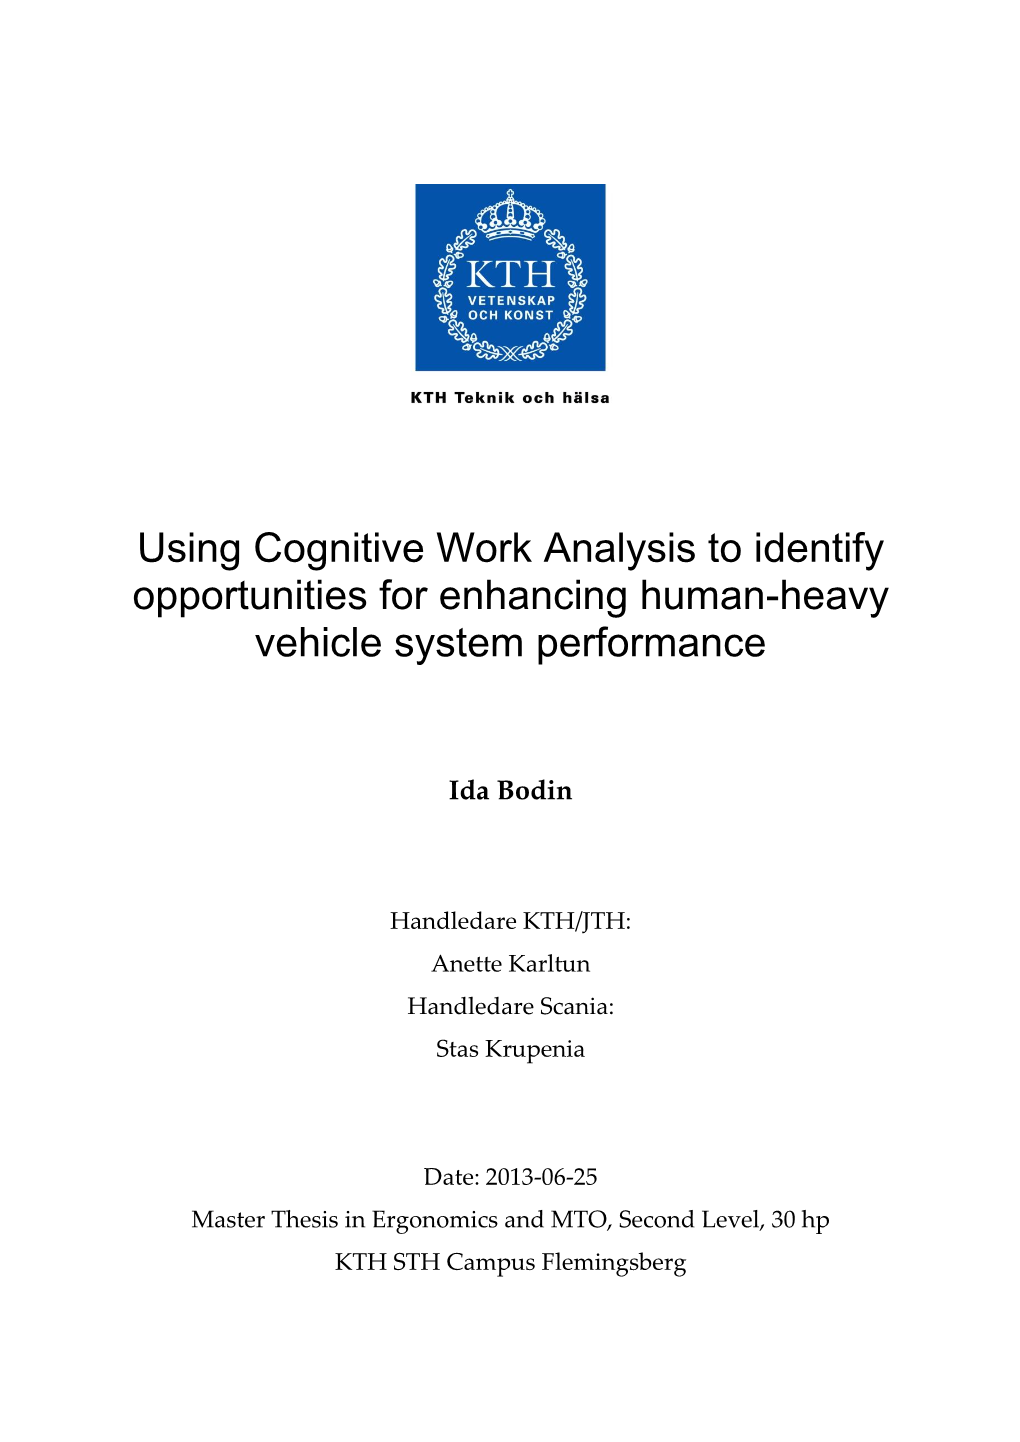 Using Cognitive Work Analysis to Identify Opportunities for Enhancing Human-Heavy Vehicle System Performance